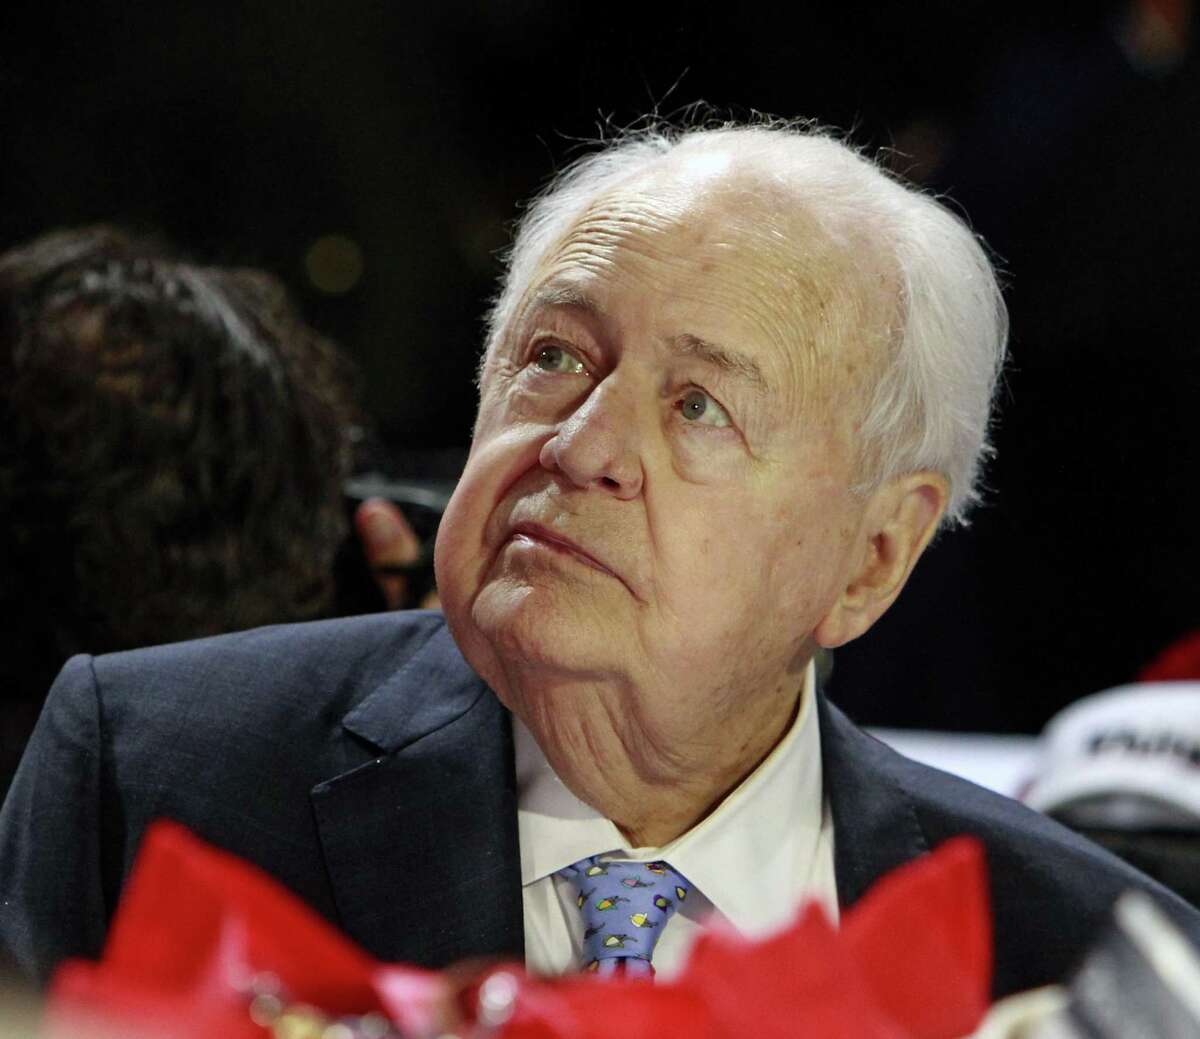 New Orleans Saints' owner Tom Benson at the 2016 Kentucky Derby. After months of negotiations and two delays, billionaire Tom Benson reached a confidential settlement with his estranged daughter regarding her ownership stakes in the New Orleans Saints and Pelicans pro sports teams, lawyers for both sides announced Friday.